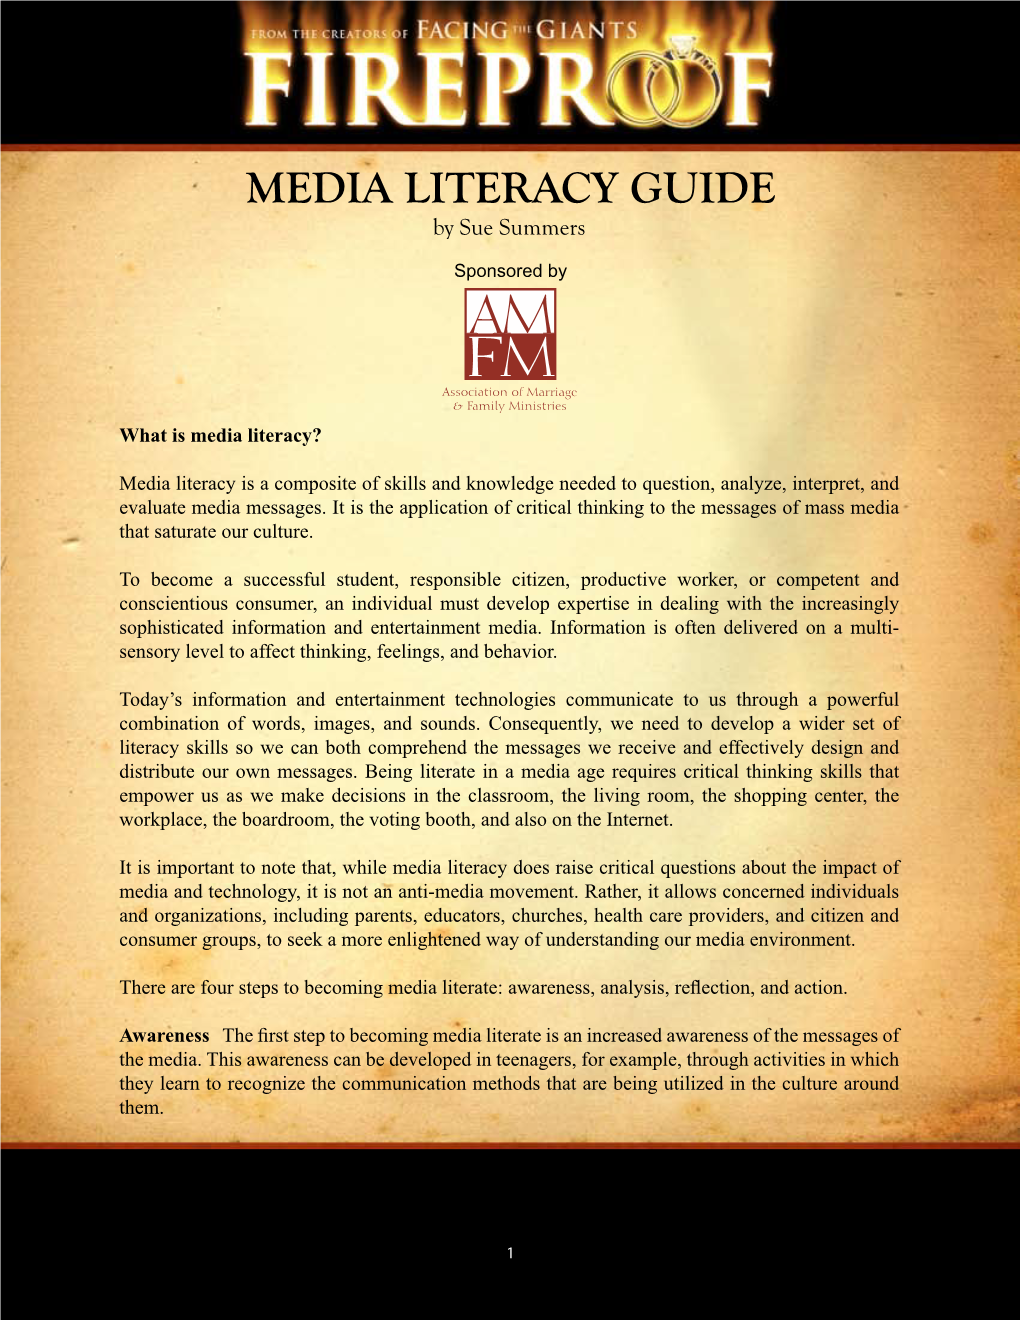 MEDIA LITERACY GUIDE by Sue Summers